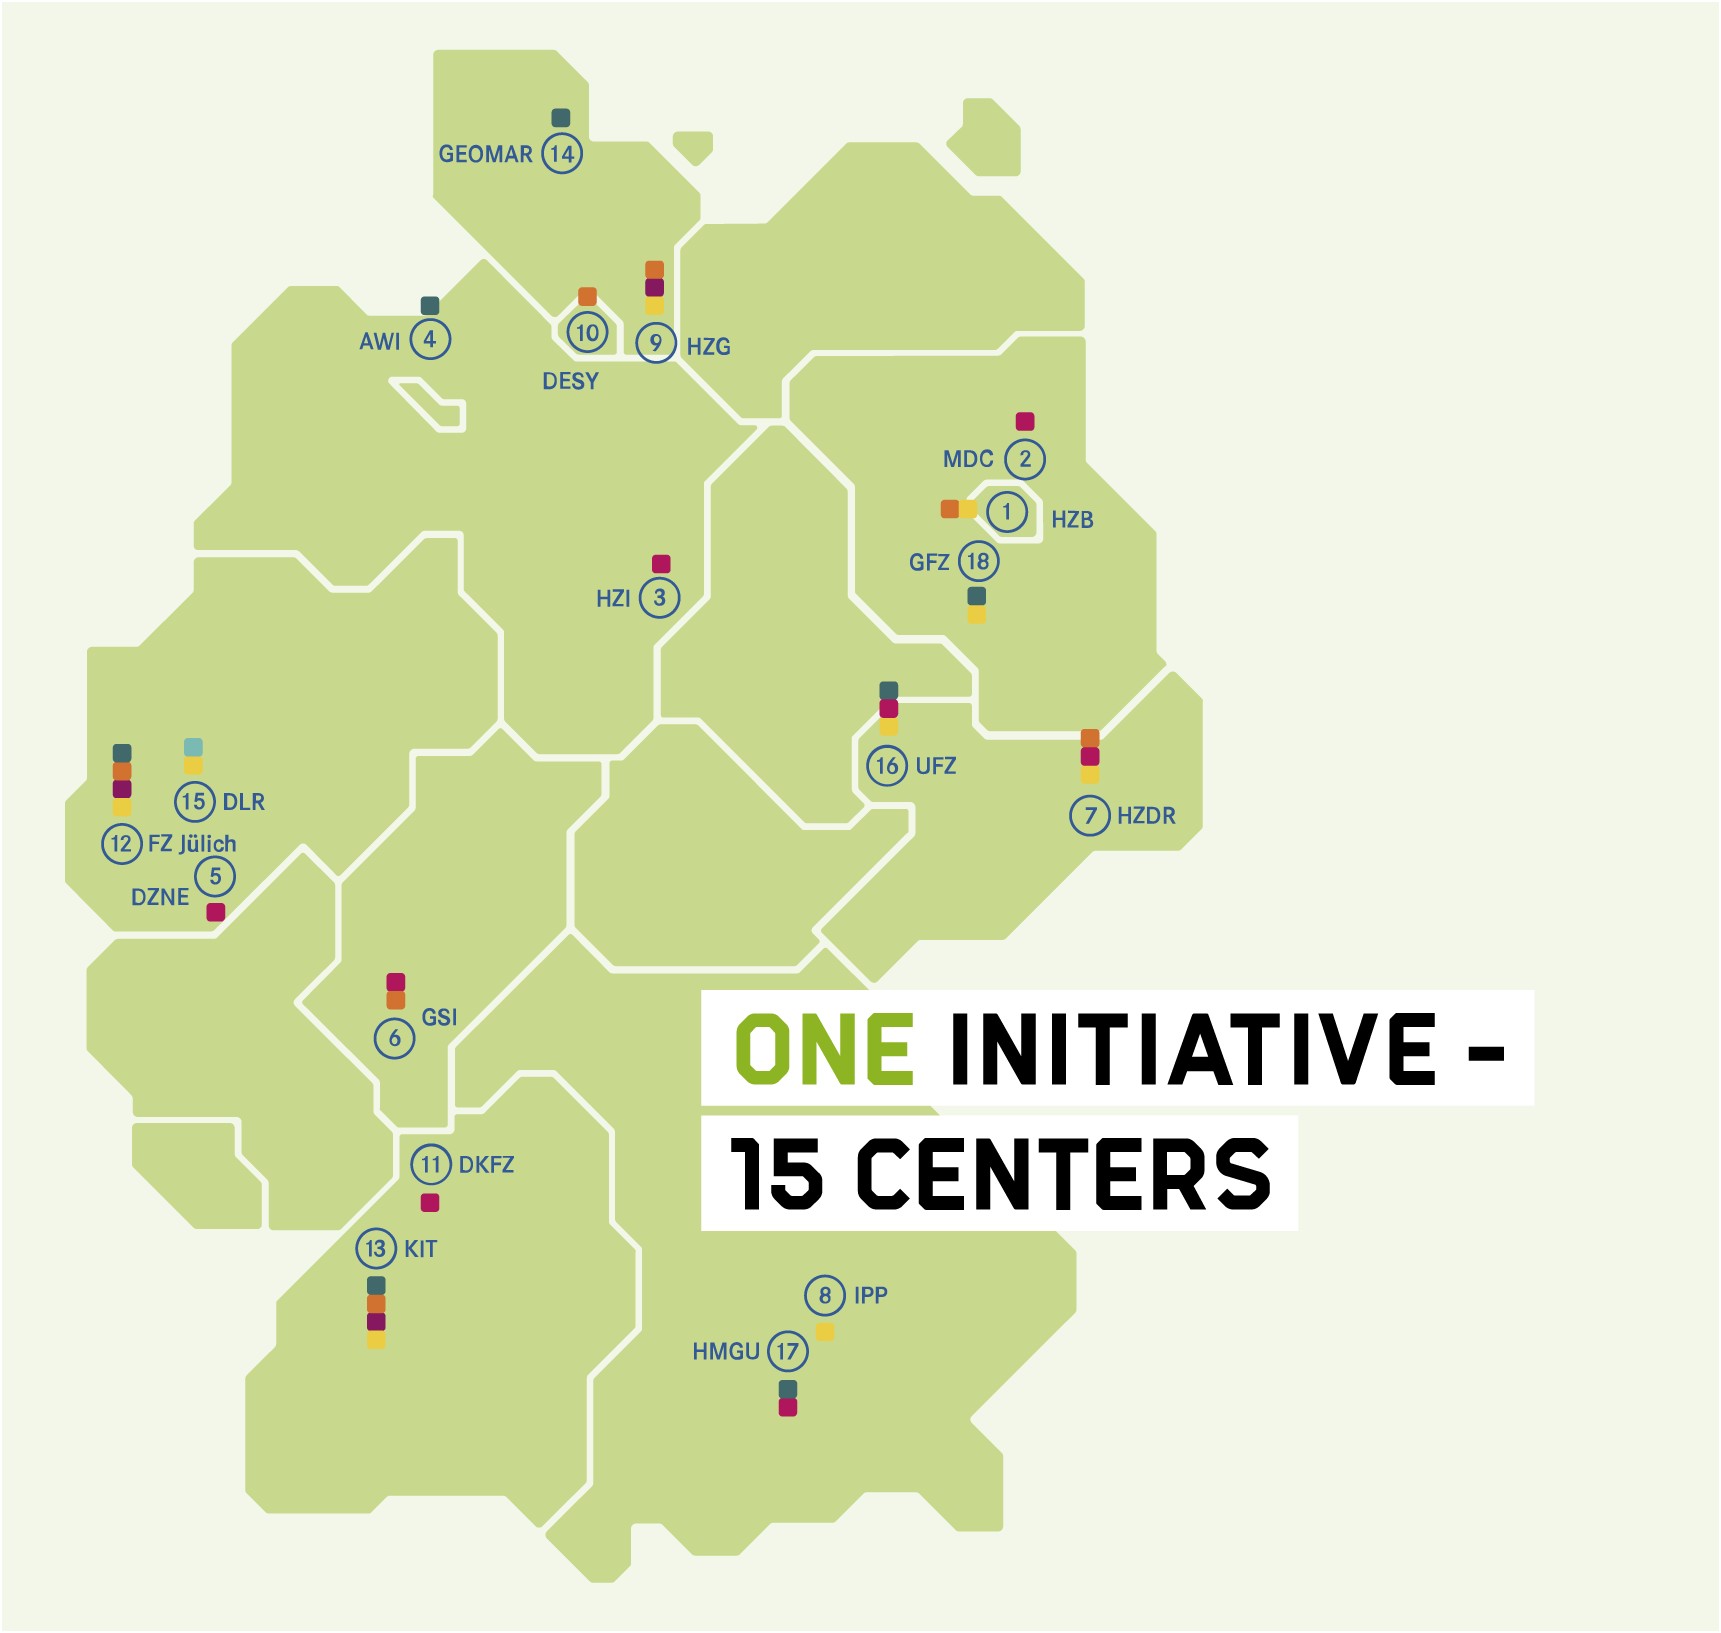 One initiative, 15 centers: Map of Germany with Centers